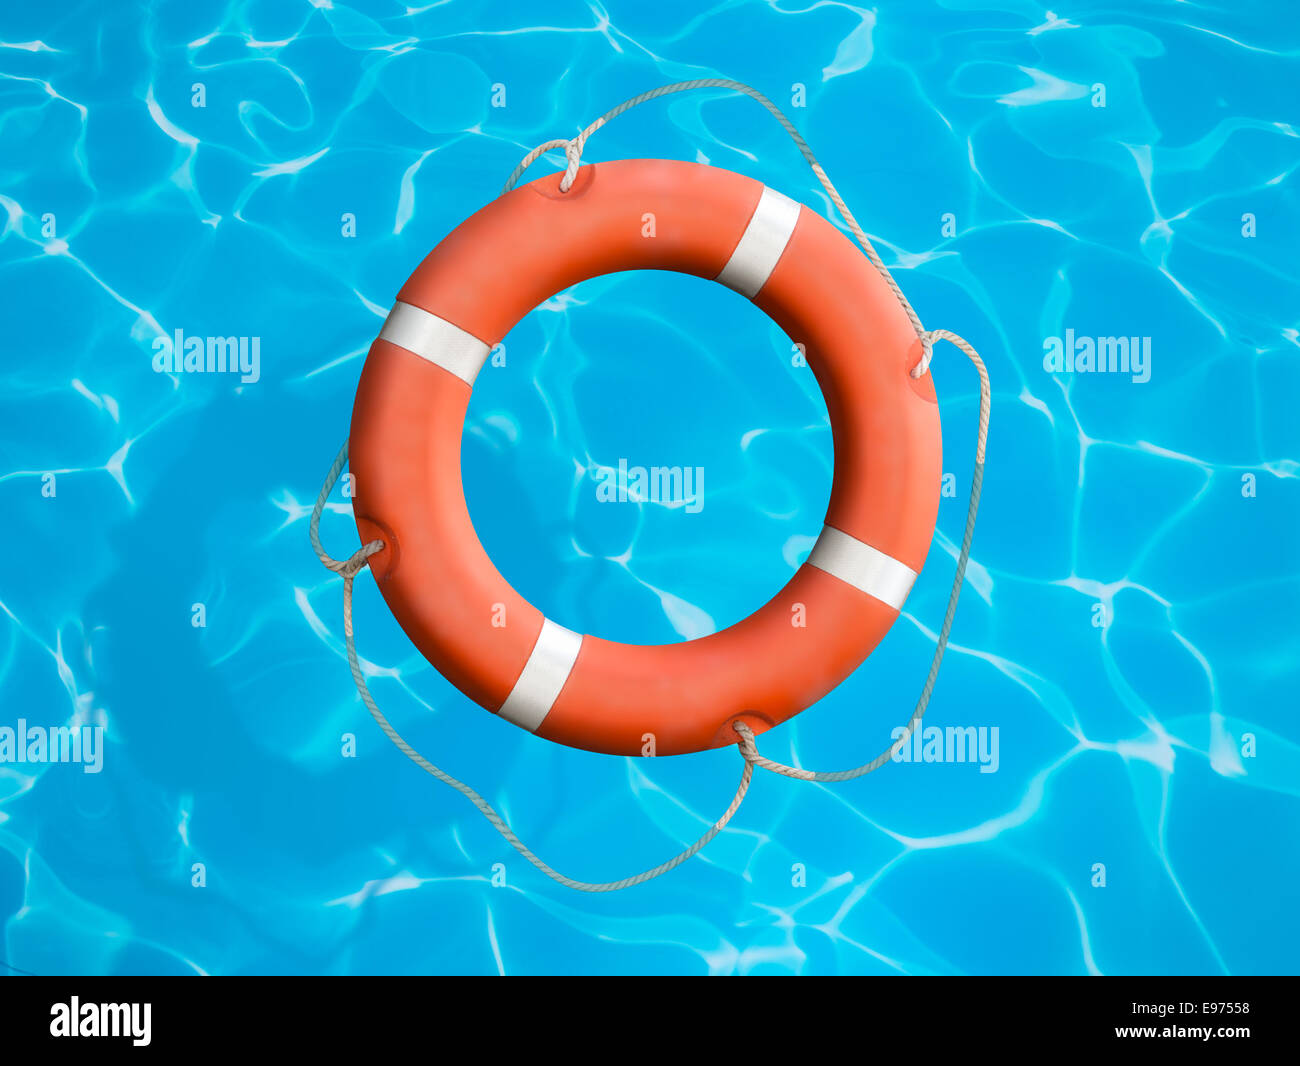 Lifebuoy on blue water surface concept Stock Photo